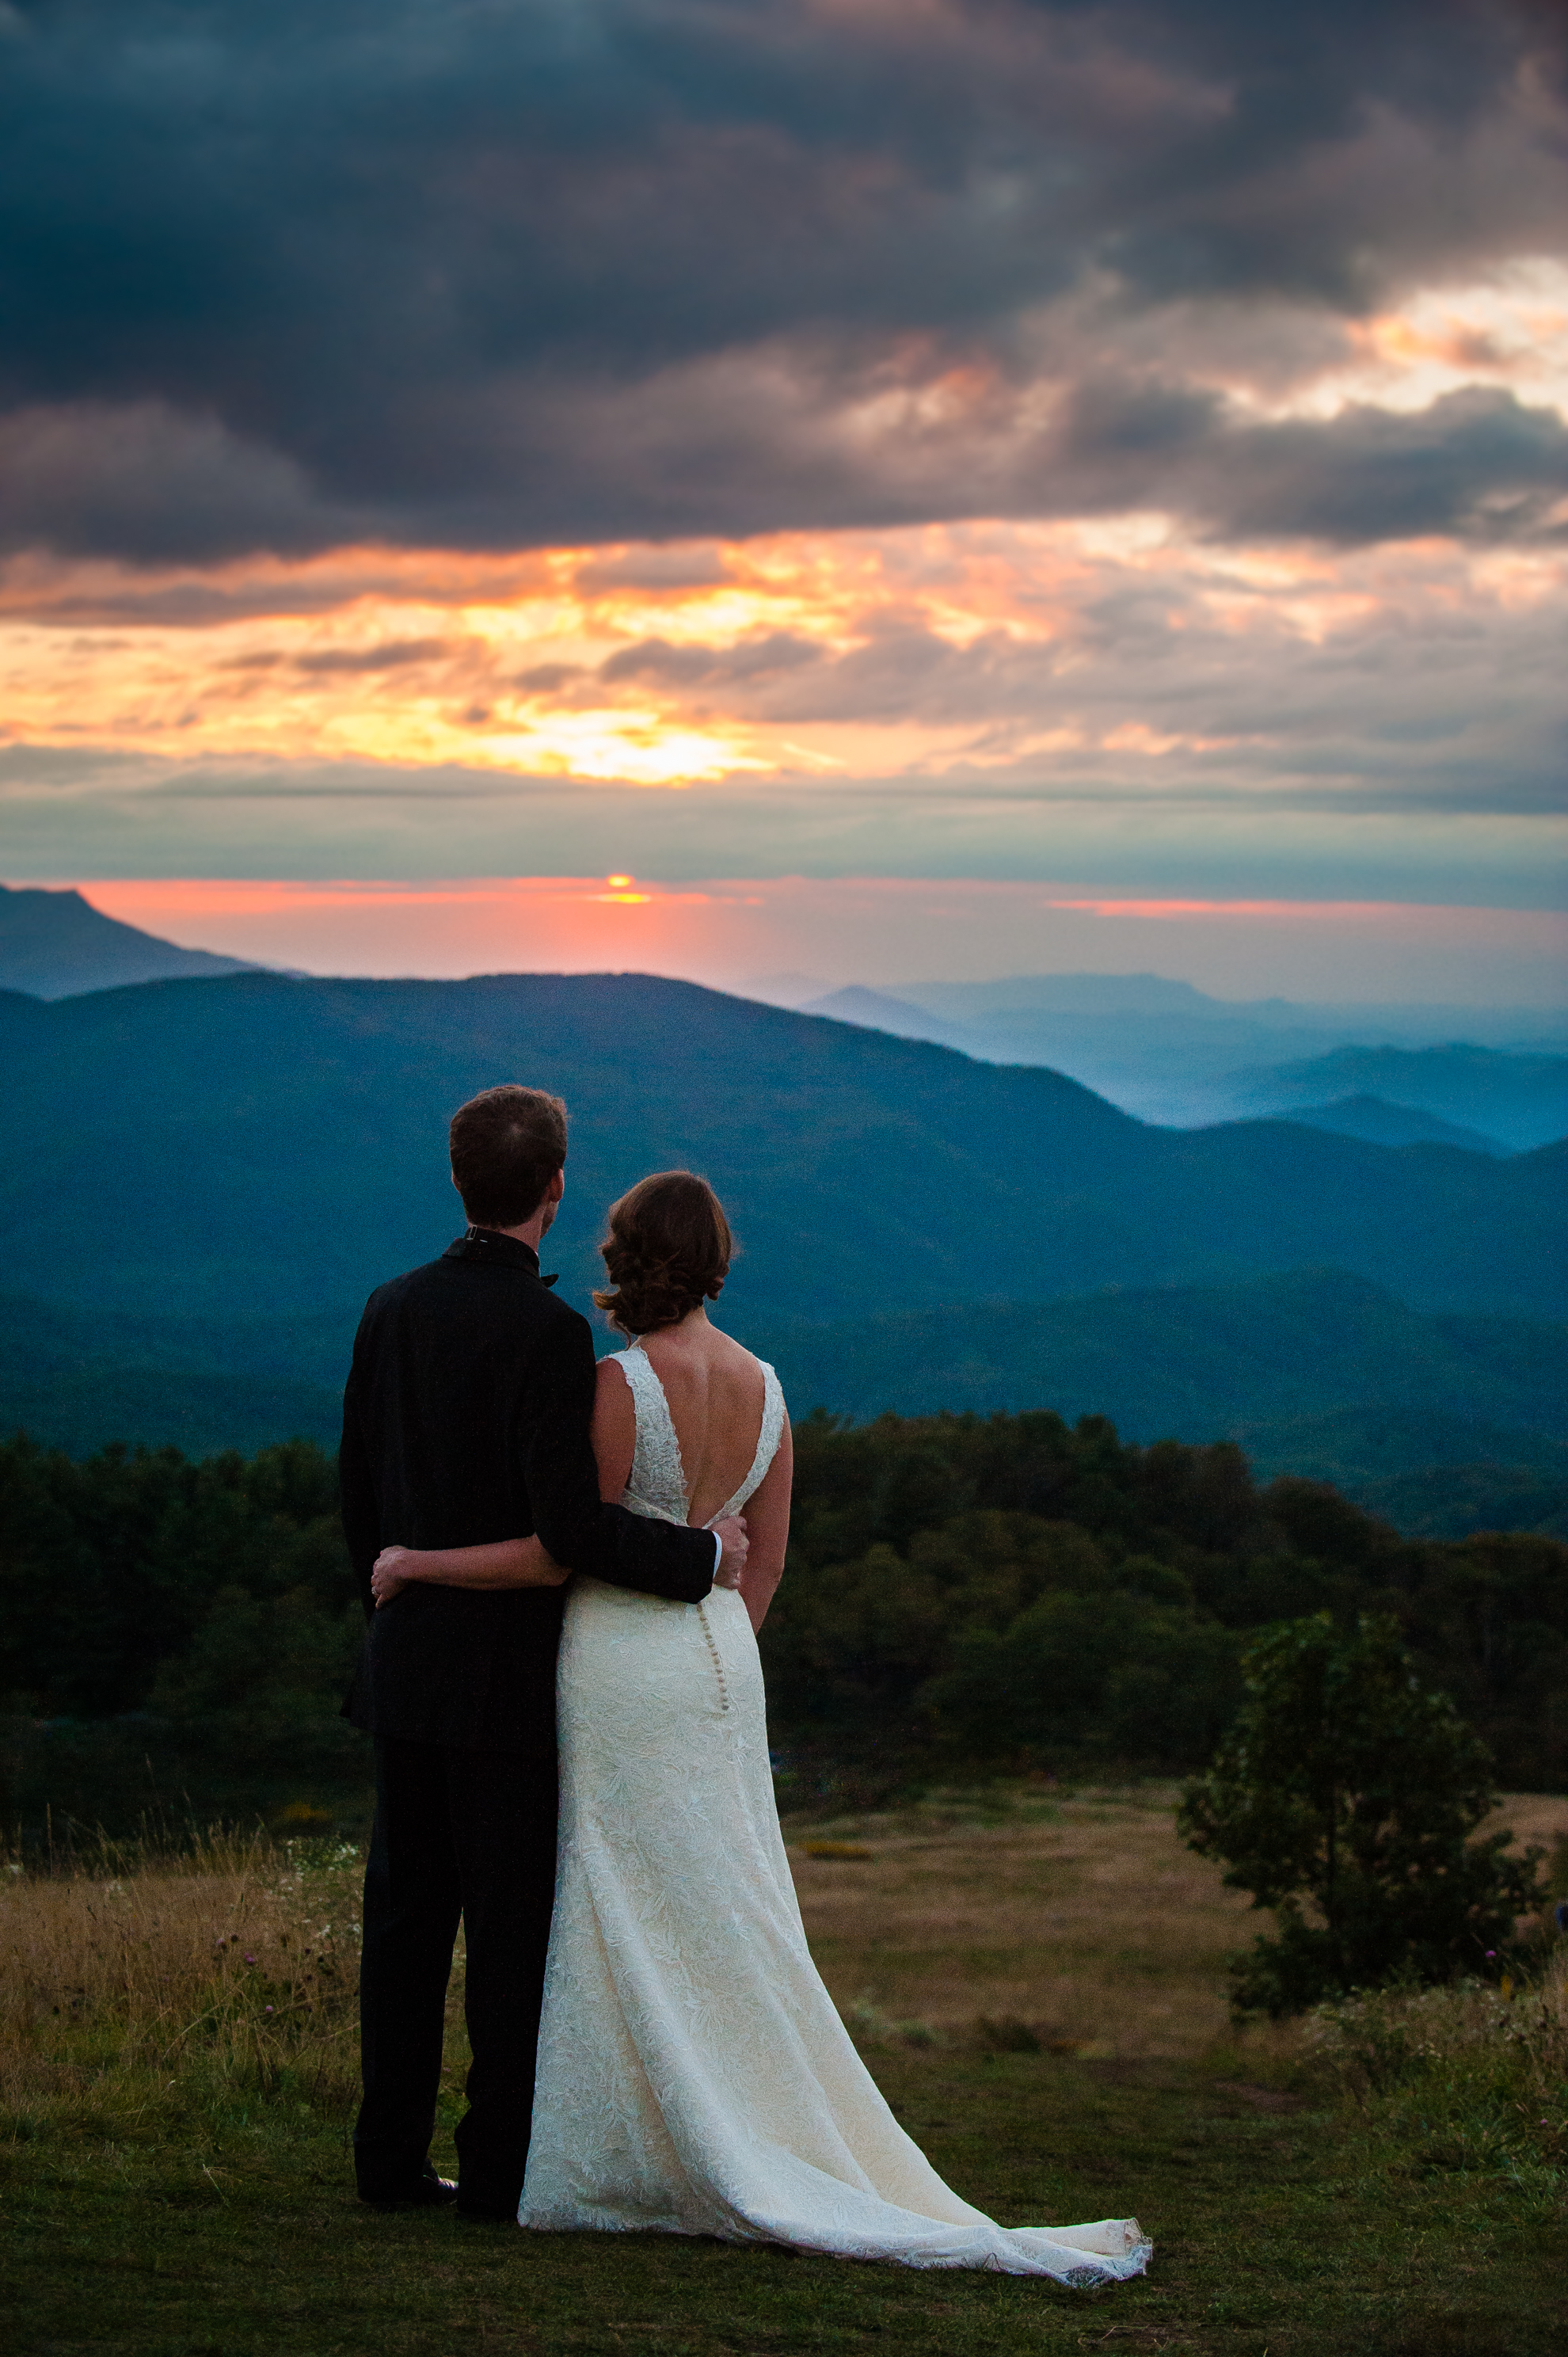 Max Patch adventure wedding photography